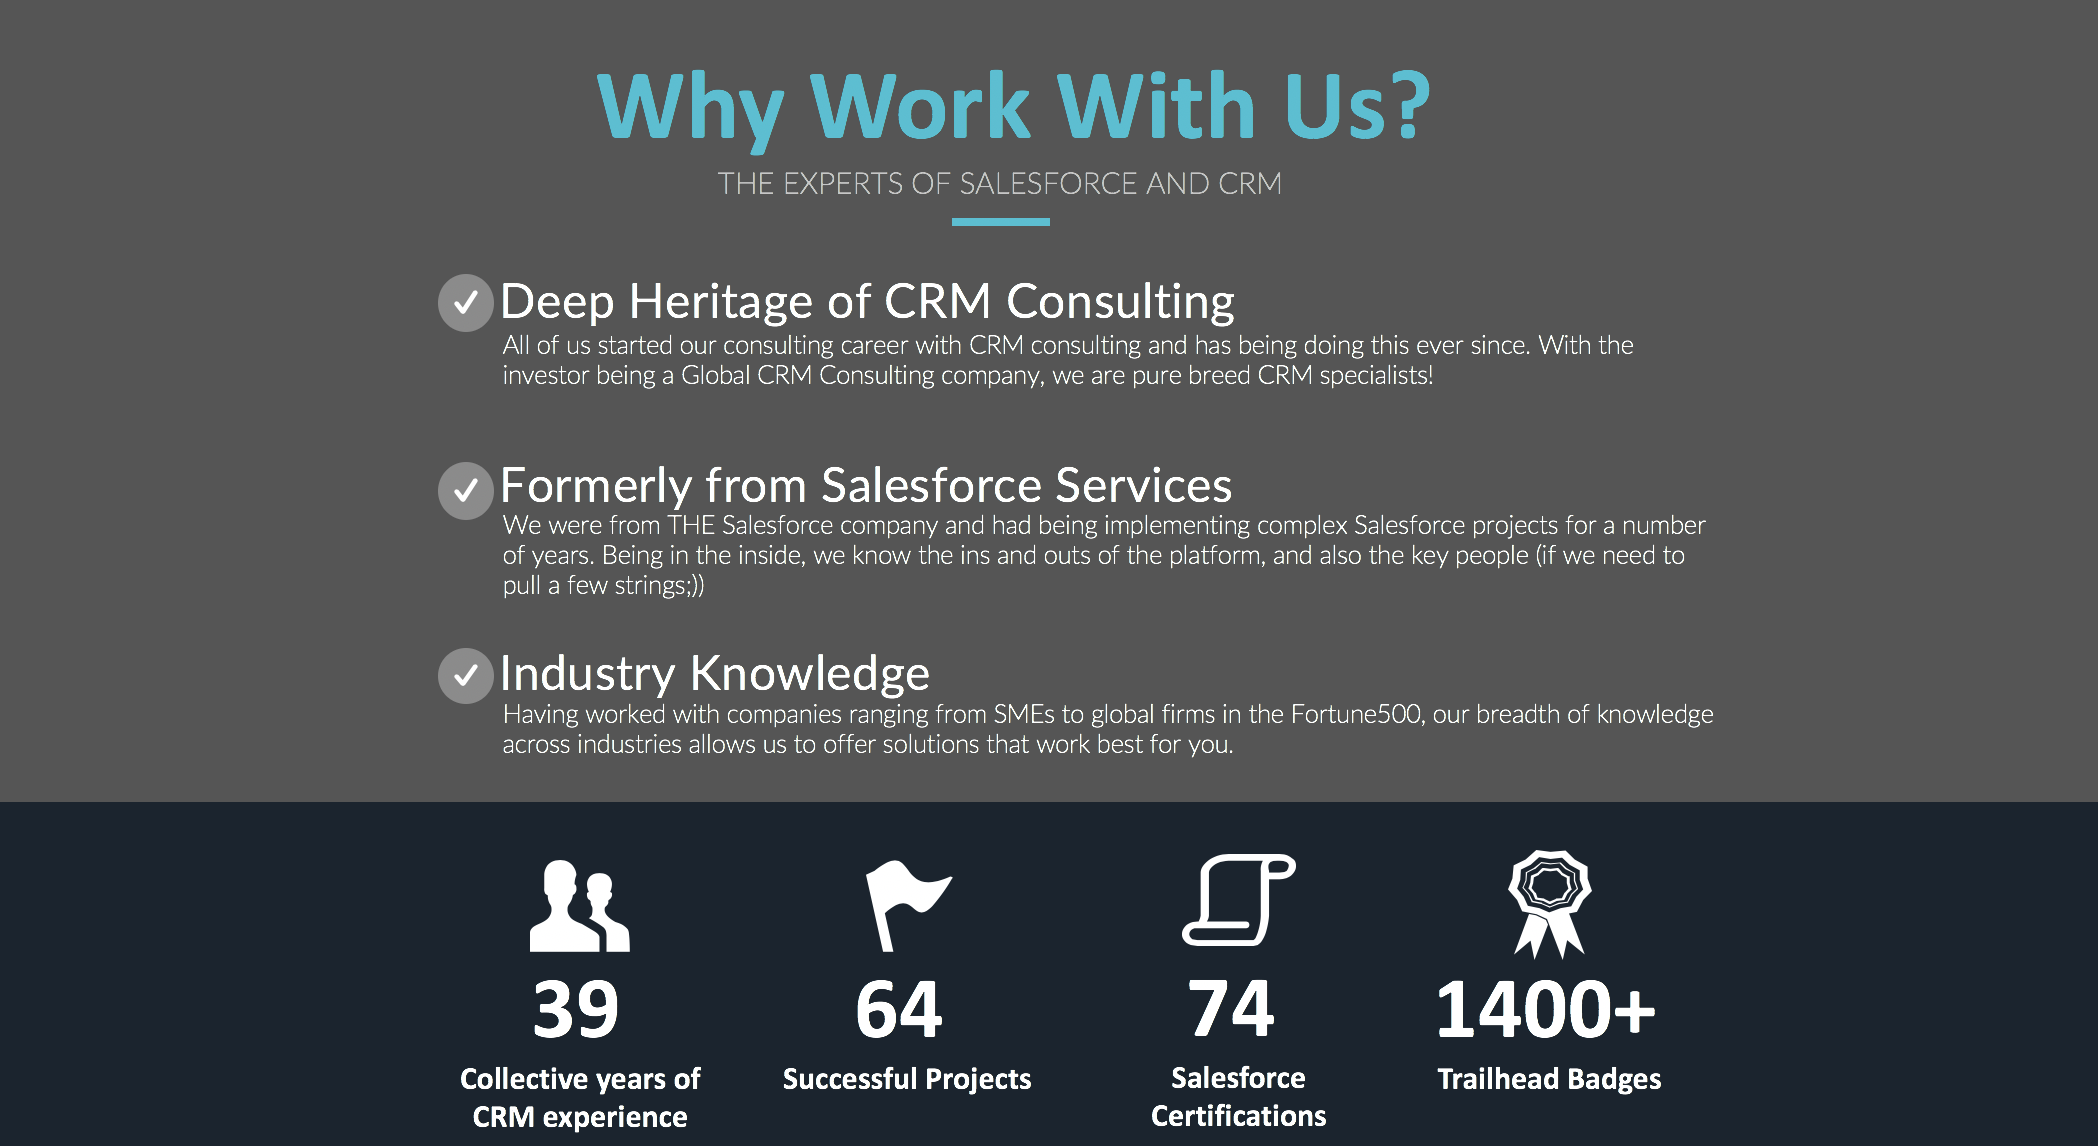 Learn More About Salesforce Consulting Services - Salesforce.com